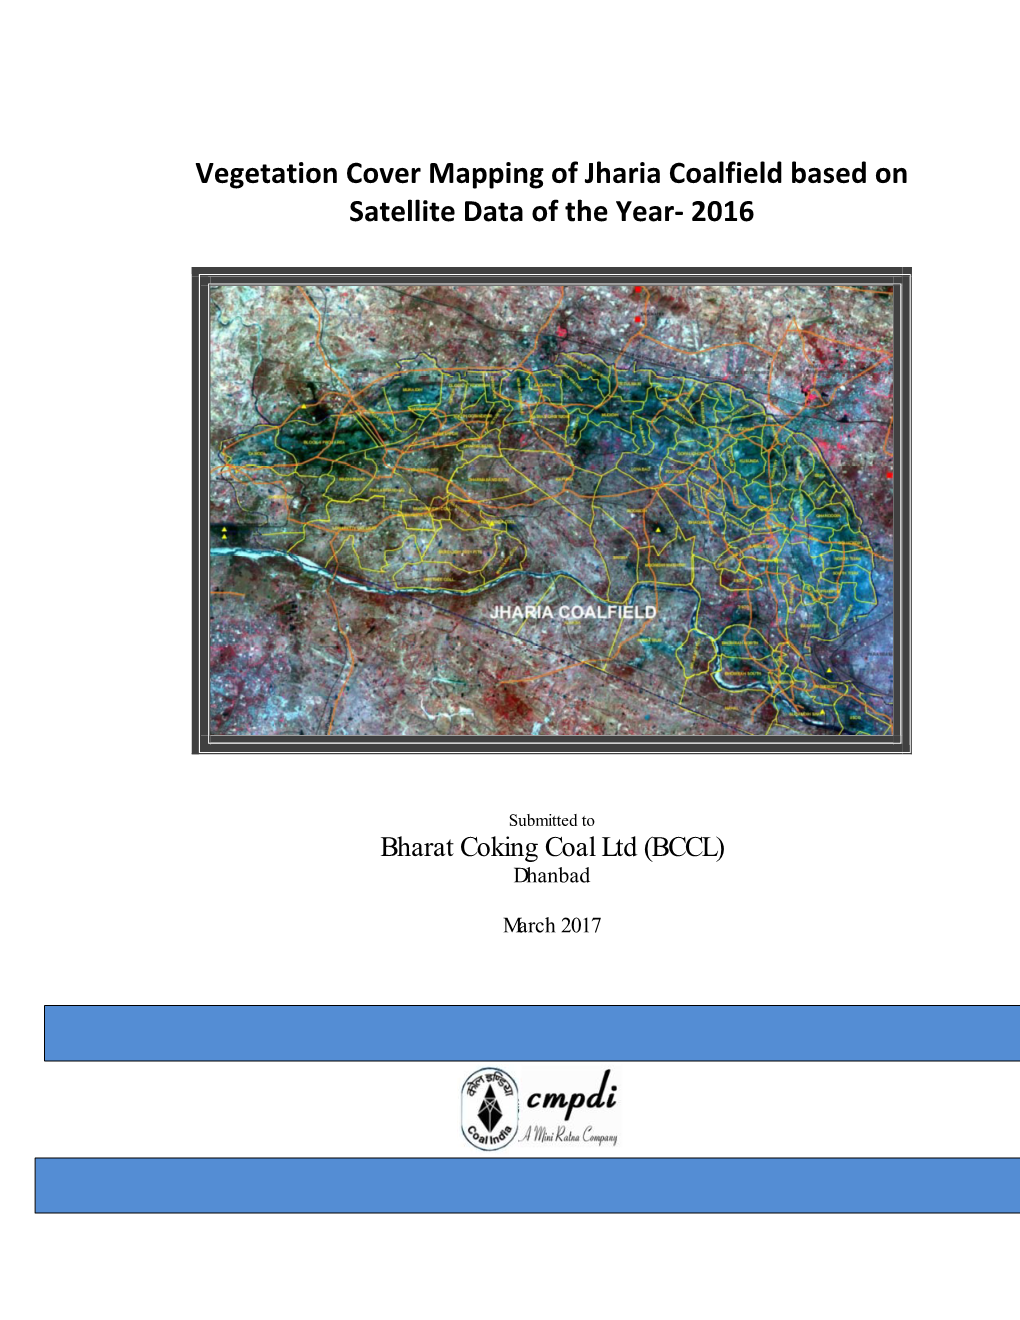 Vegetation Cover Mapping of Jharia Coalfield Based on Satellite Data of the Year‐ 2016